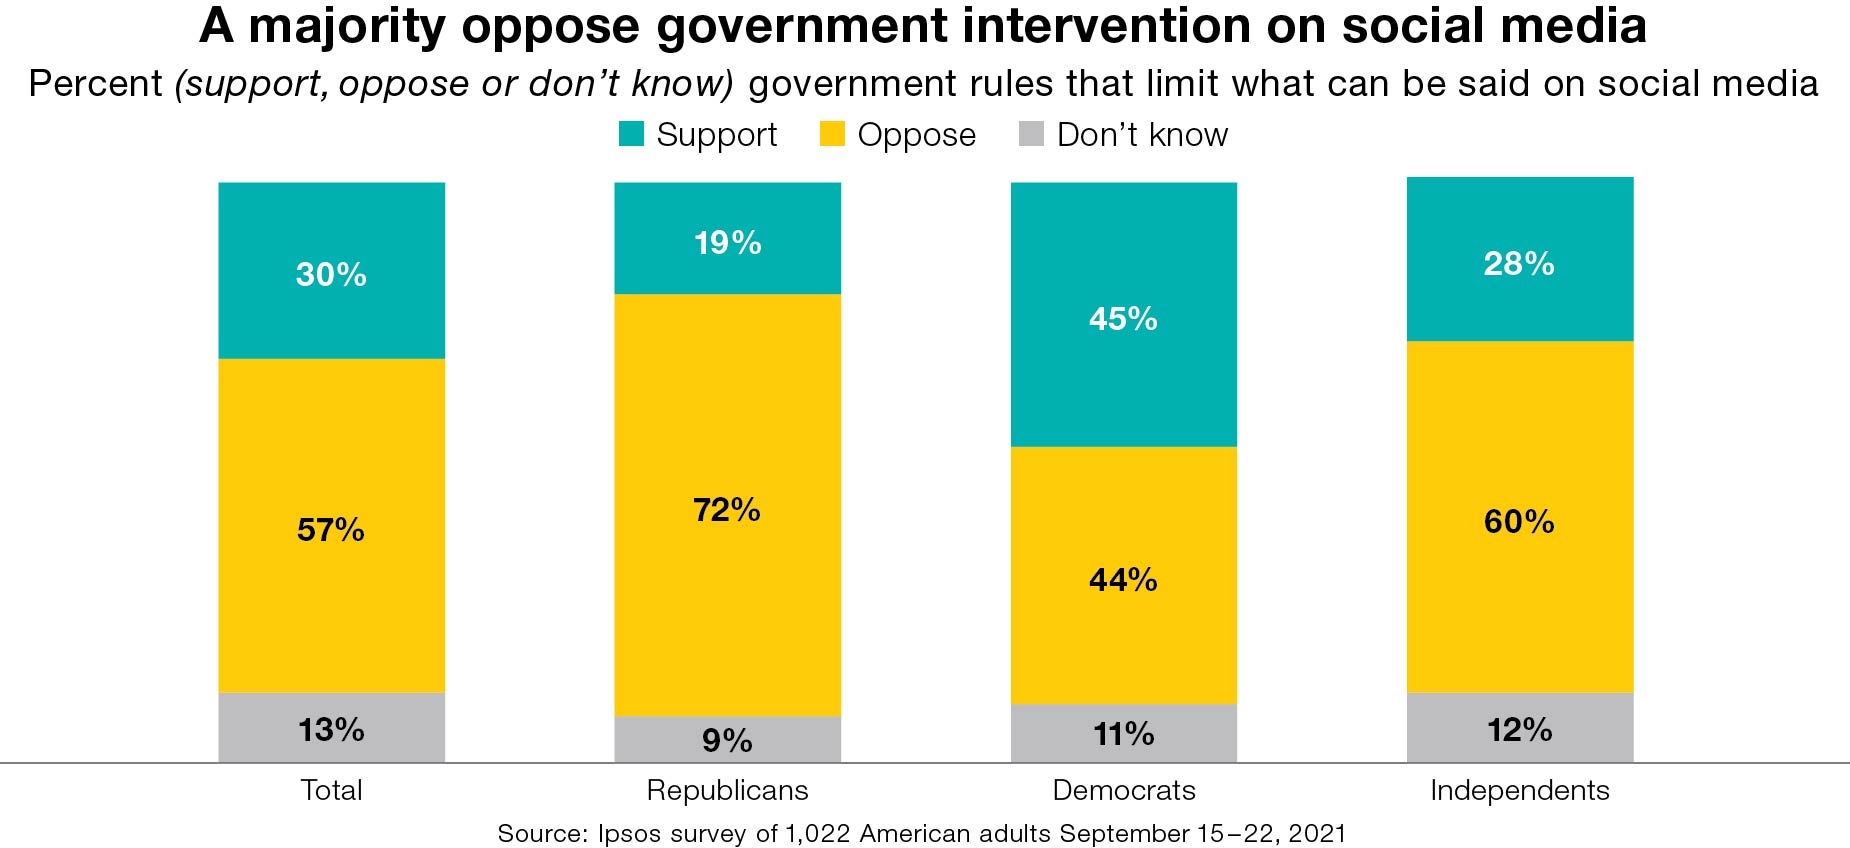 A majority oppose government intervention on social media